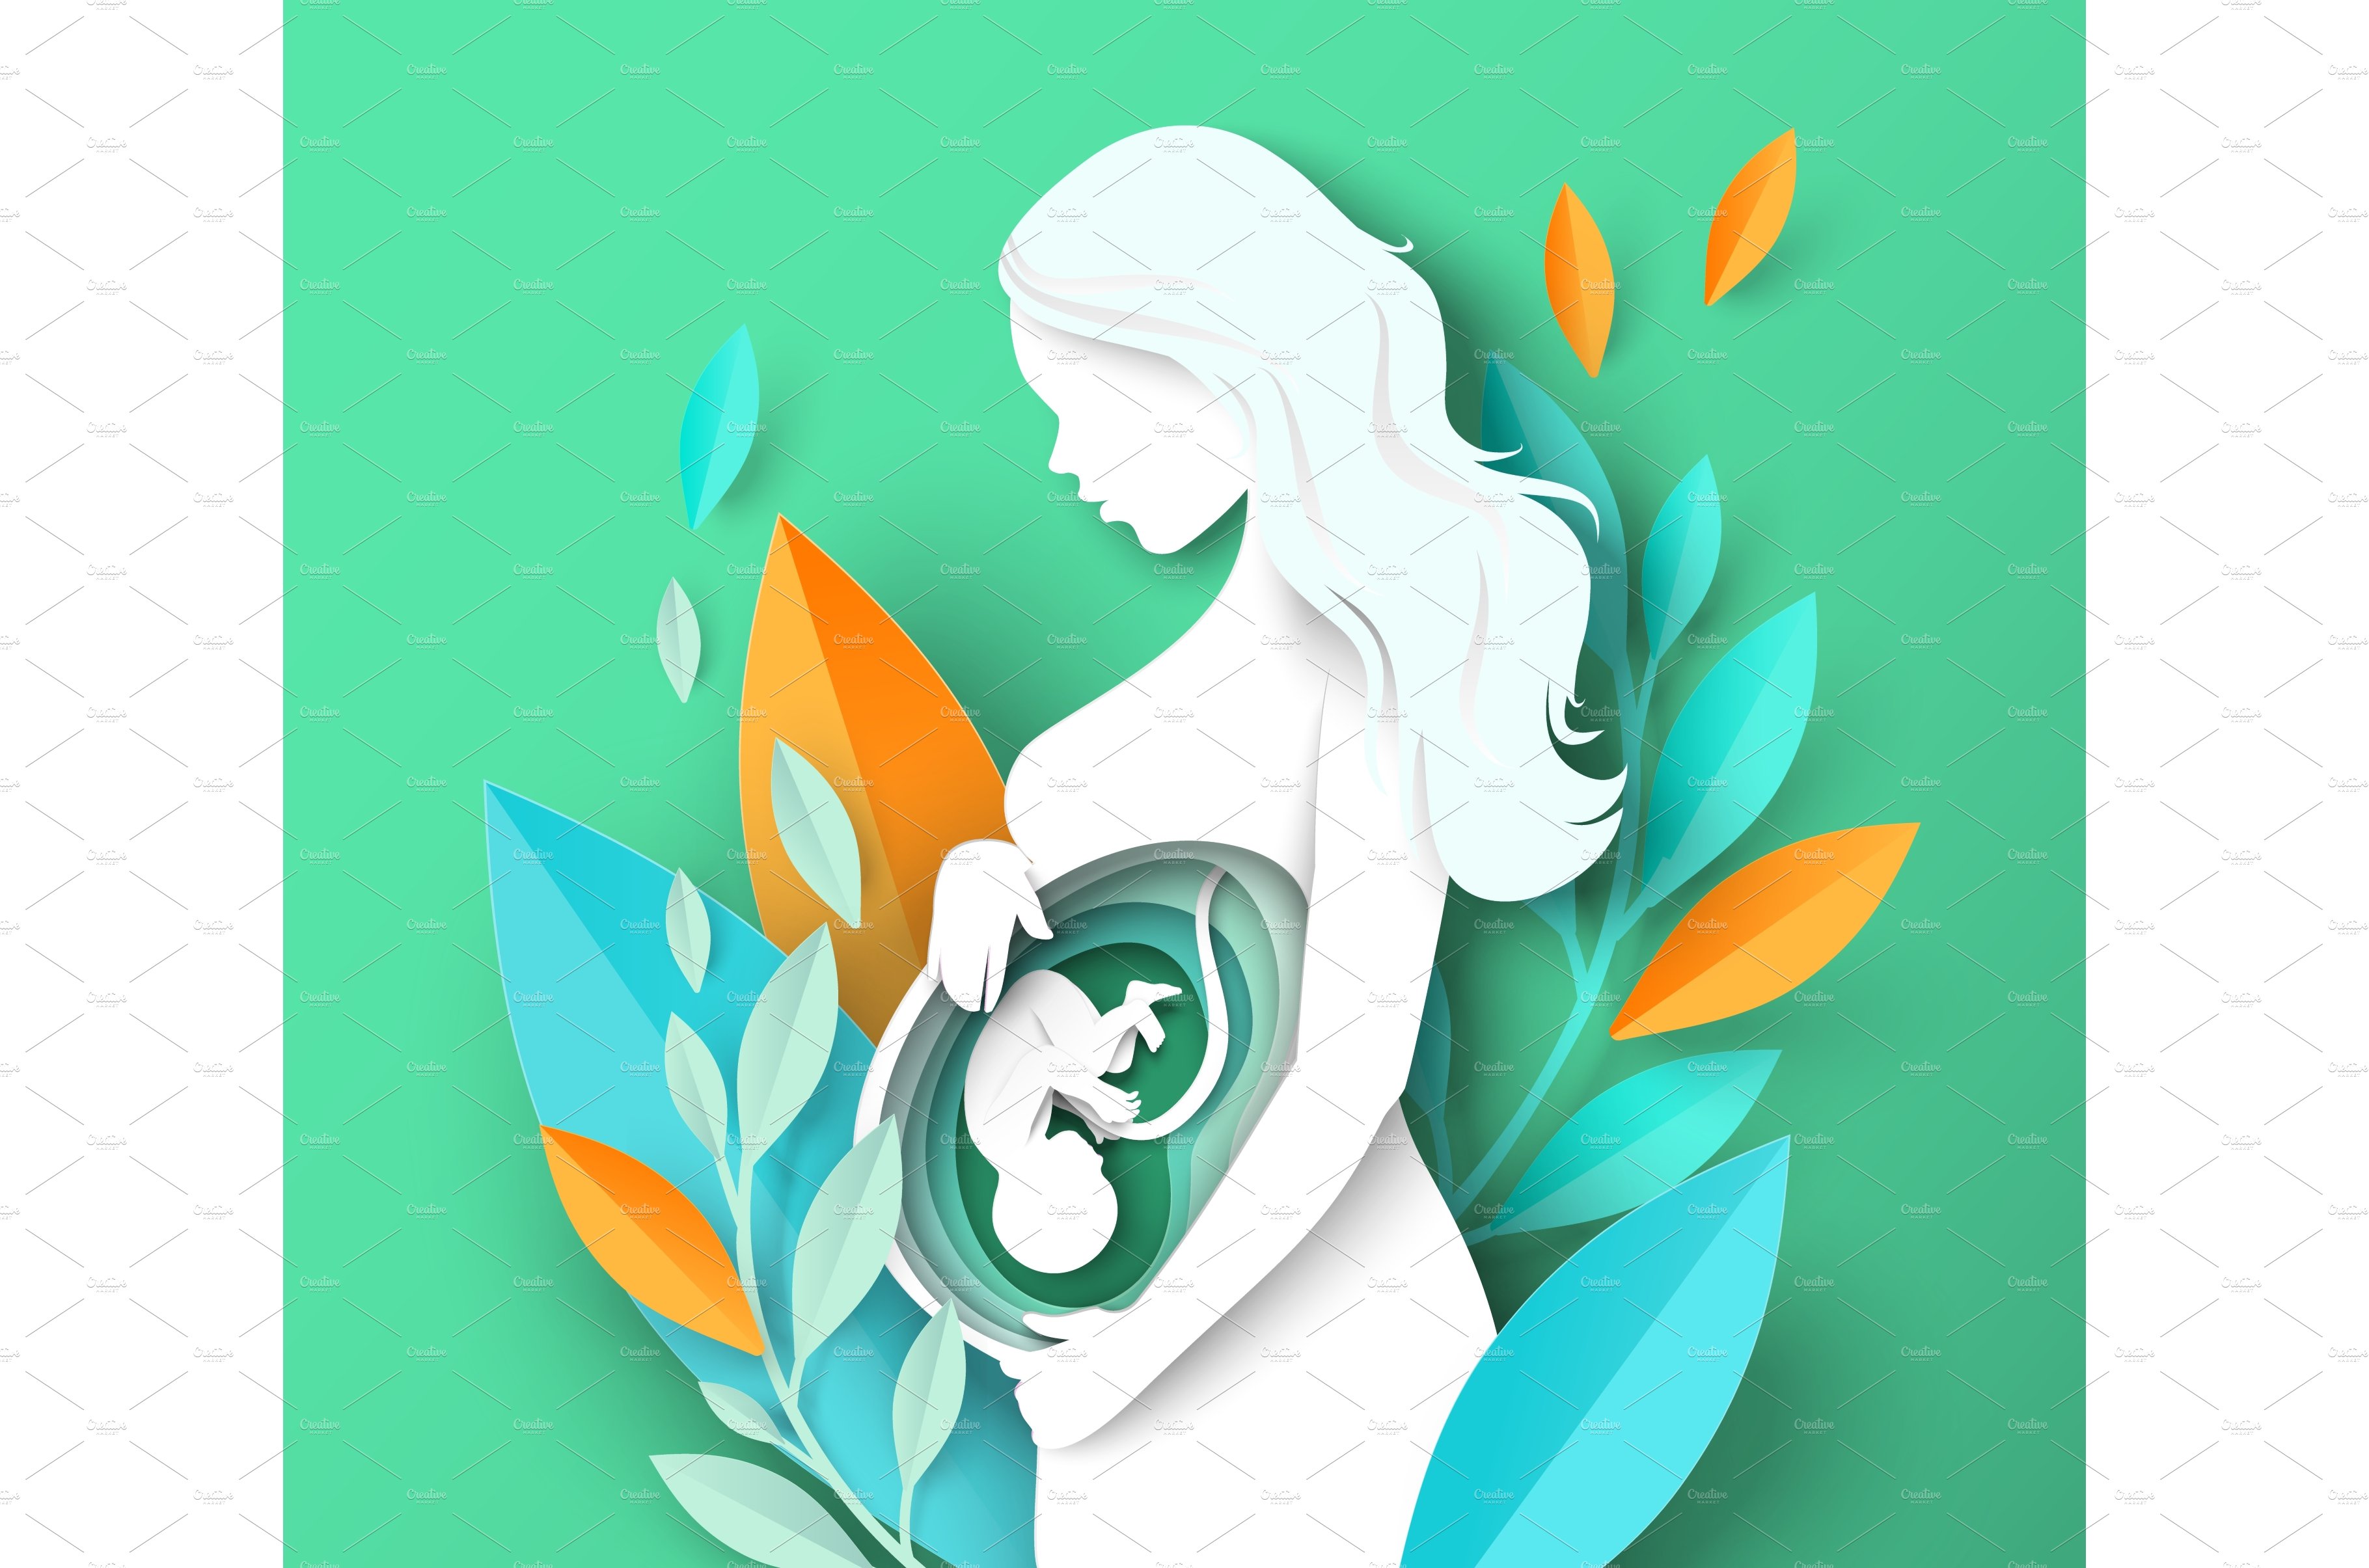 Pregnant woman with baby fetus paper cover image.